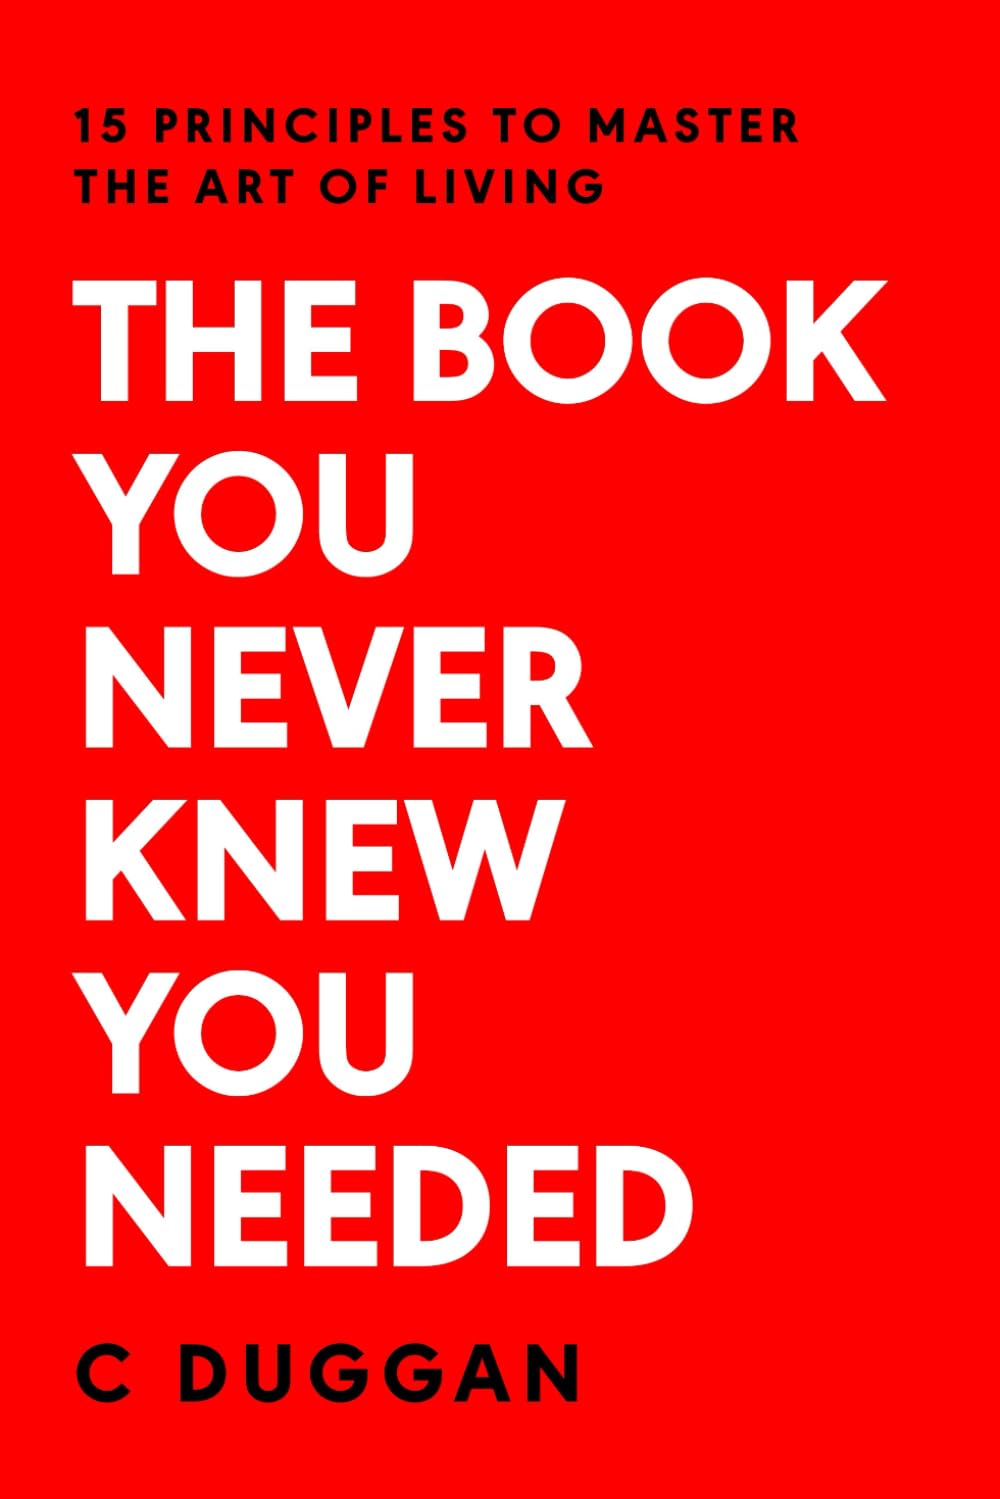 Caoimhe Duggan Releases New Book Entitled "The Book You Never Knew You Needed" 